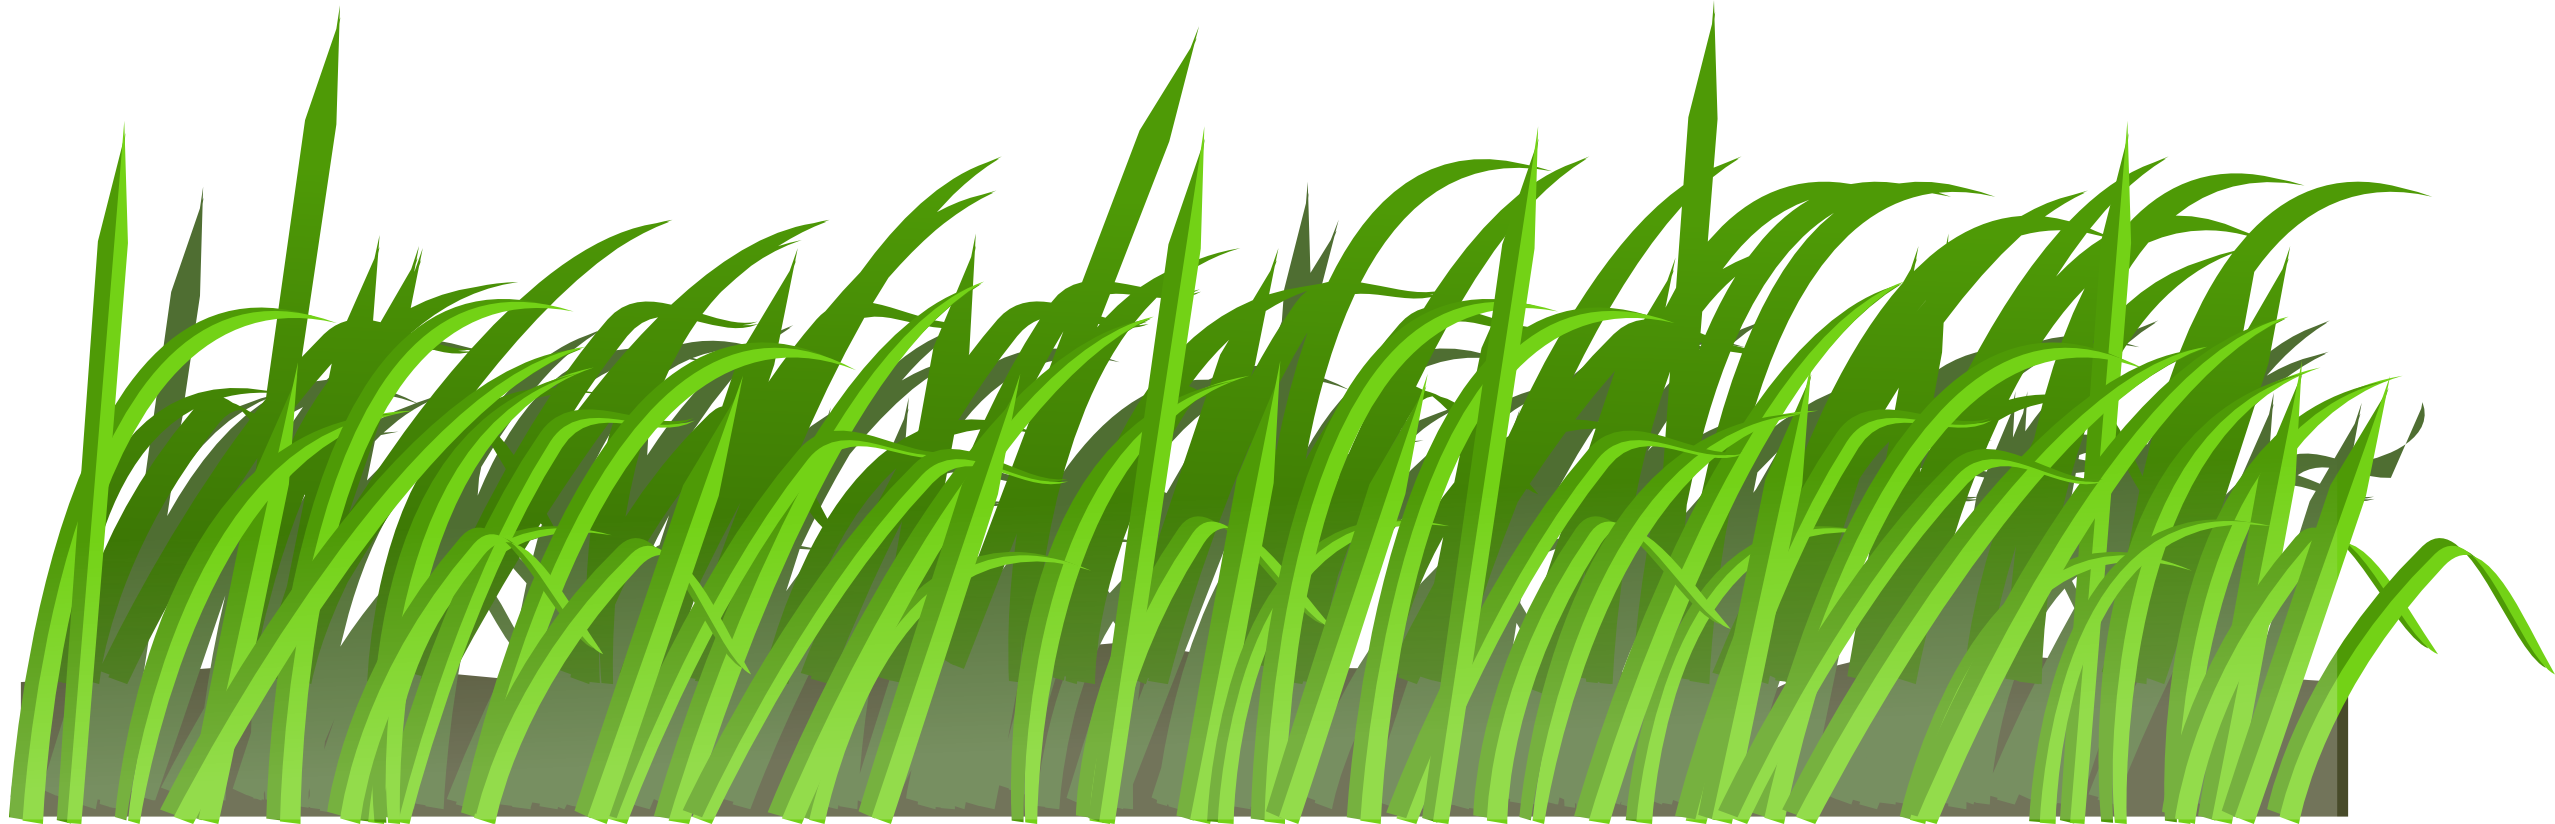 free grass pictures clip art - photo #18